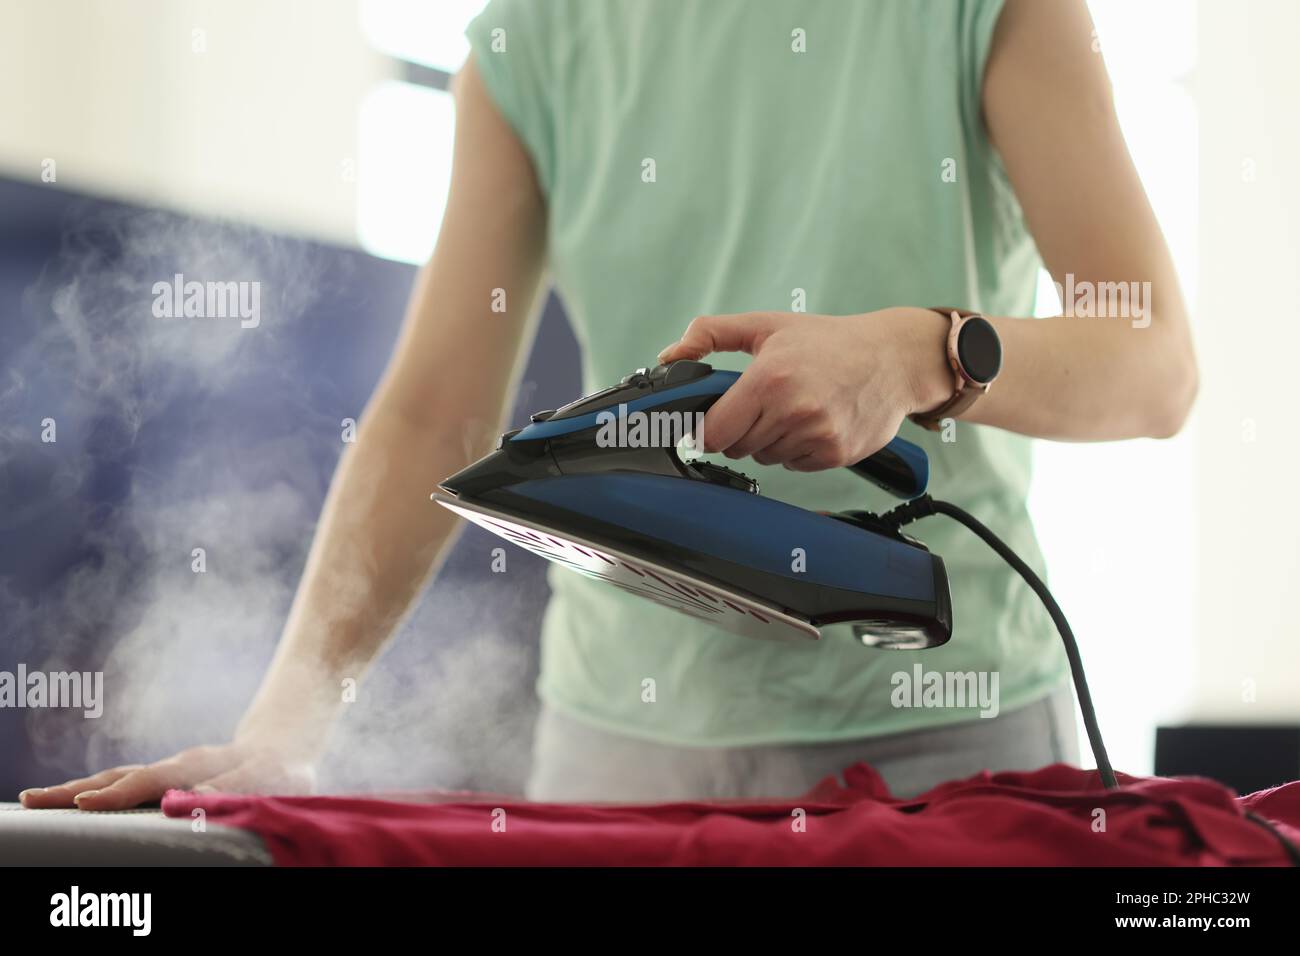 Woman irons clothes with hot steam appliance at home Stock Photo